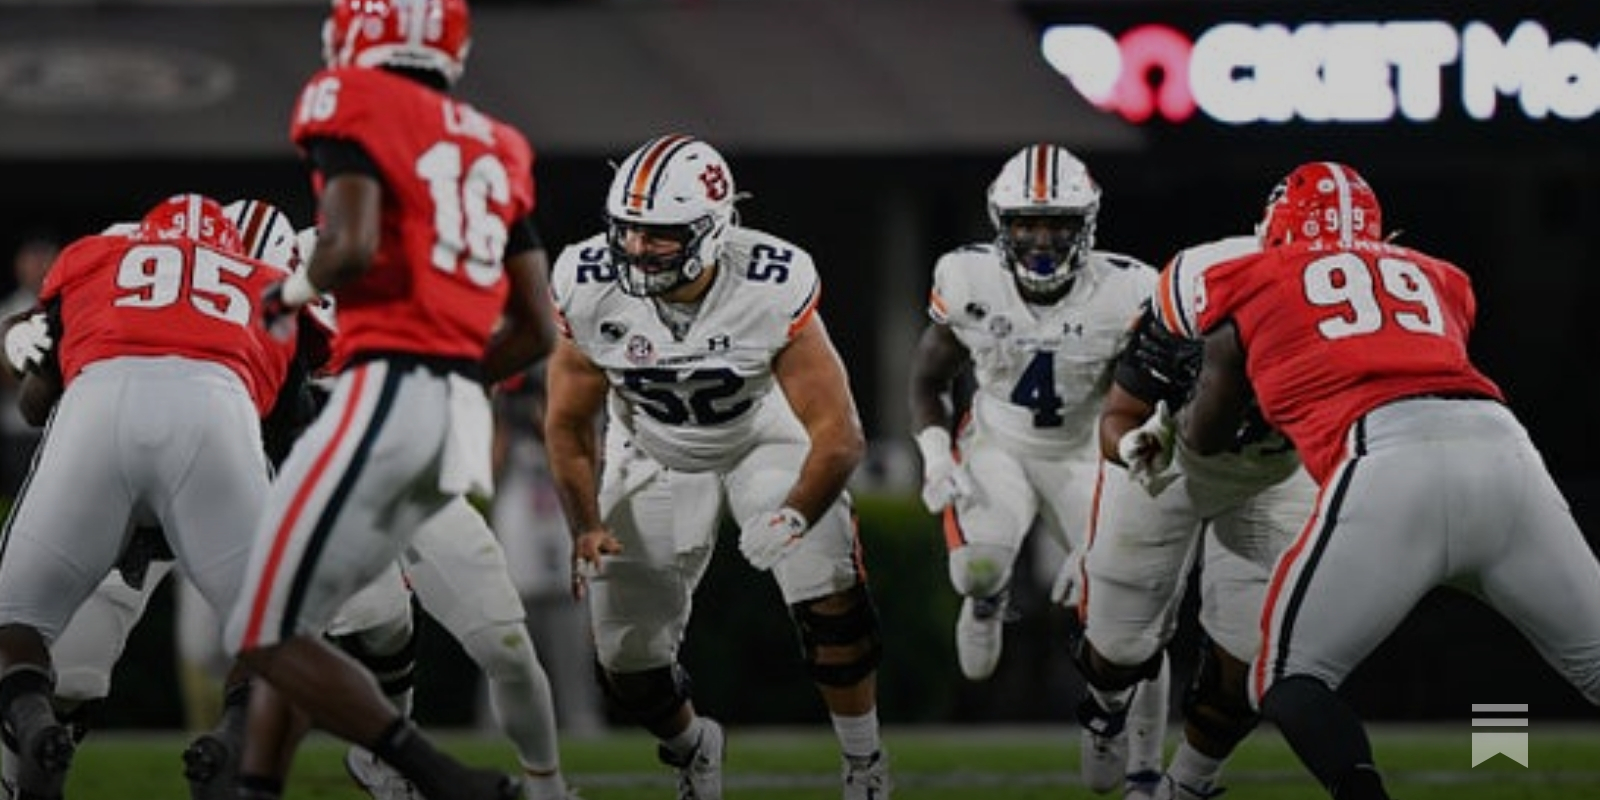 Aubserver Mailbag 23: Who are some breakout candidates for the 2021 season?